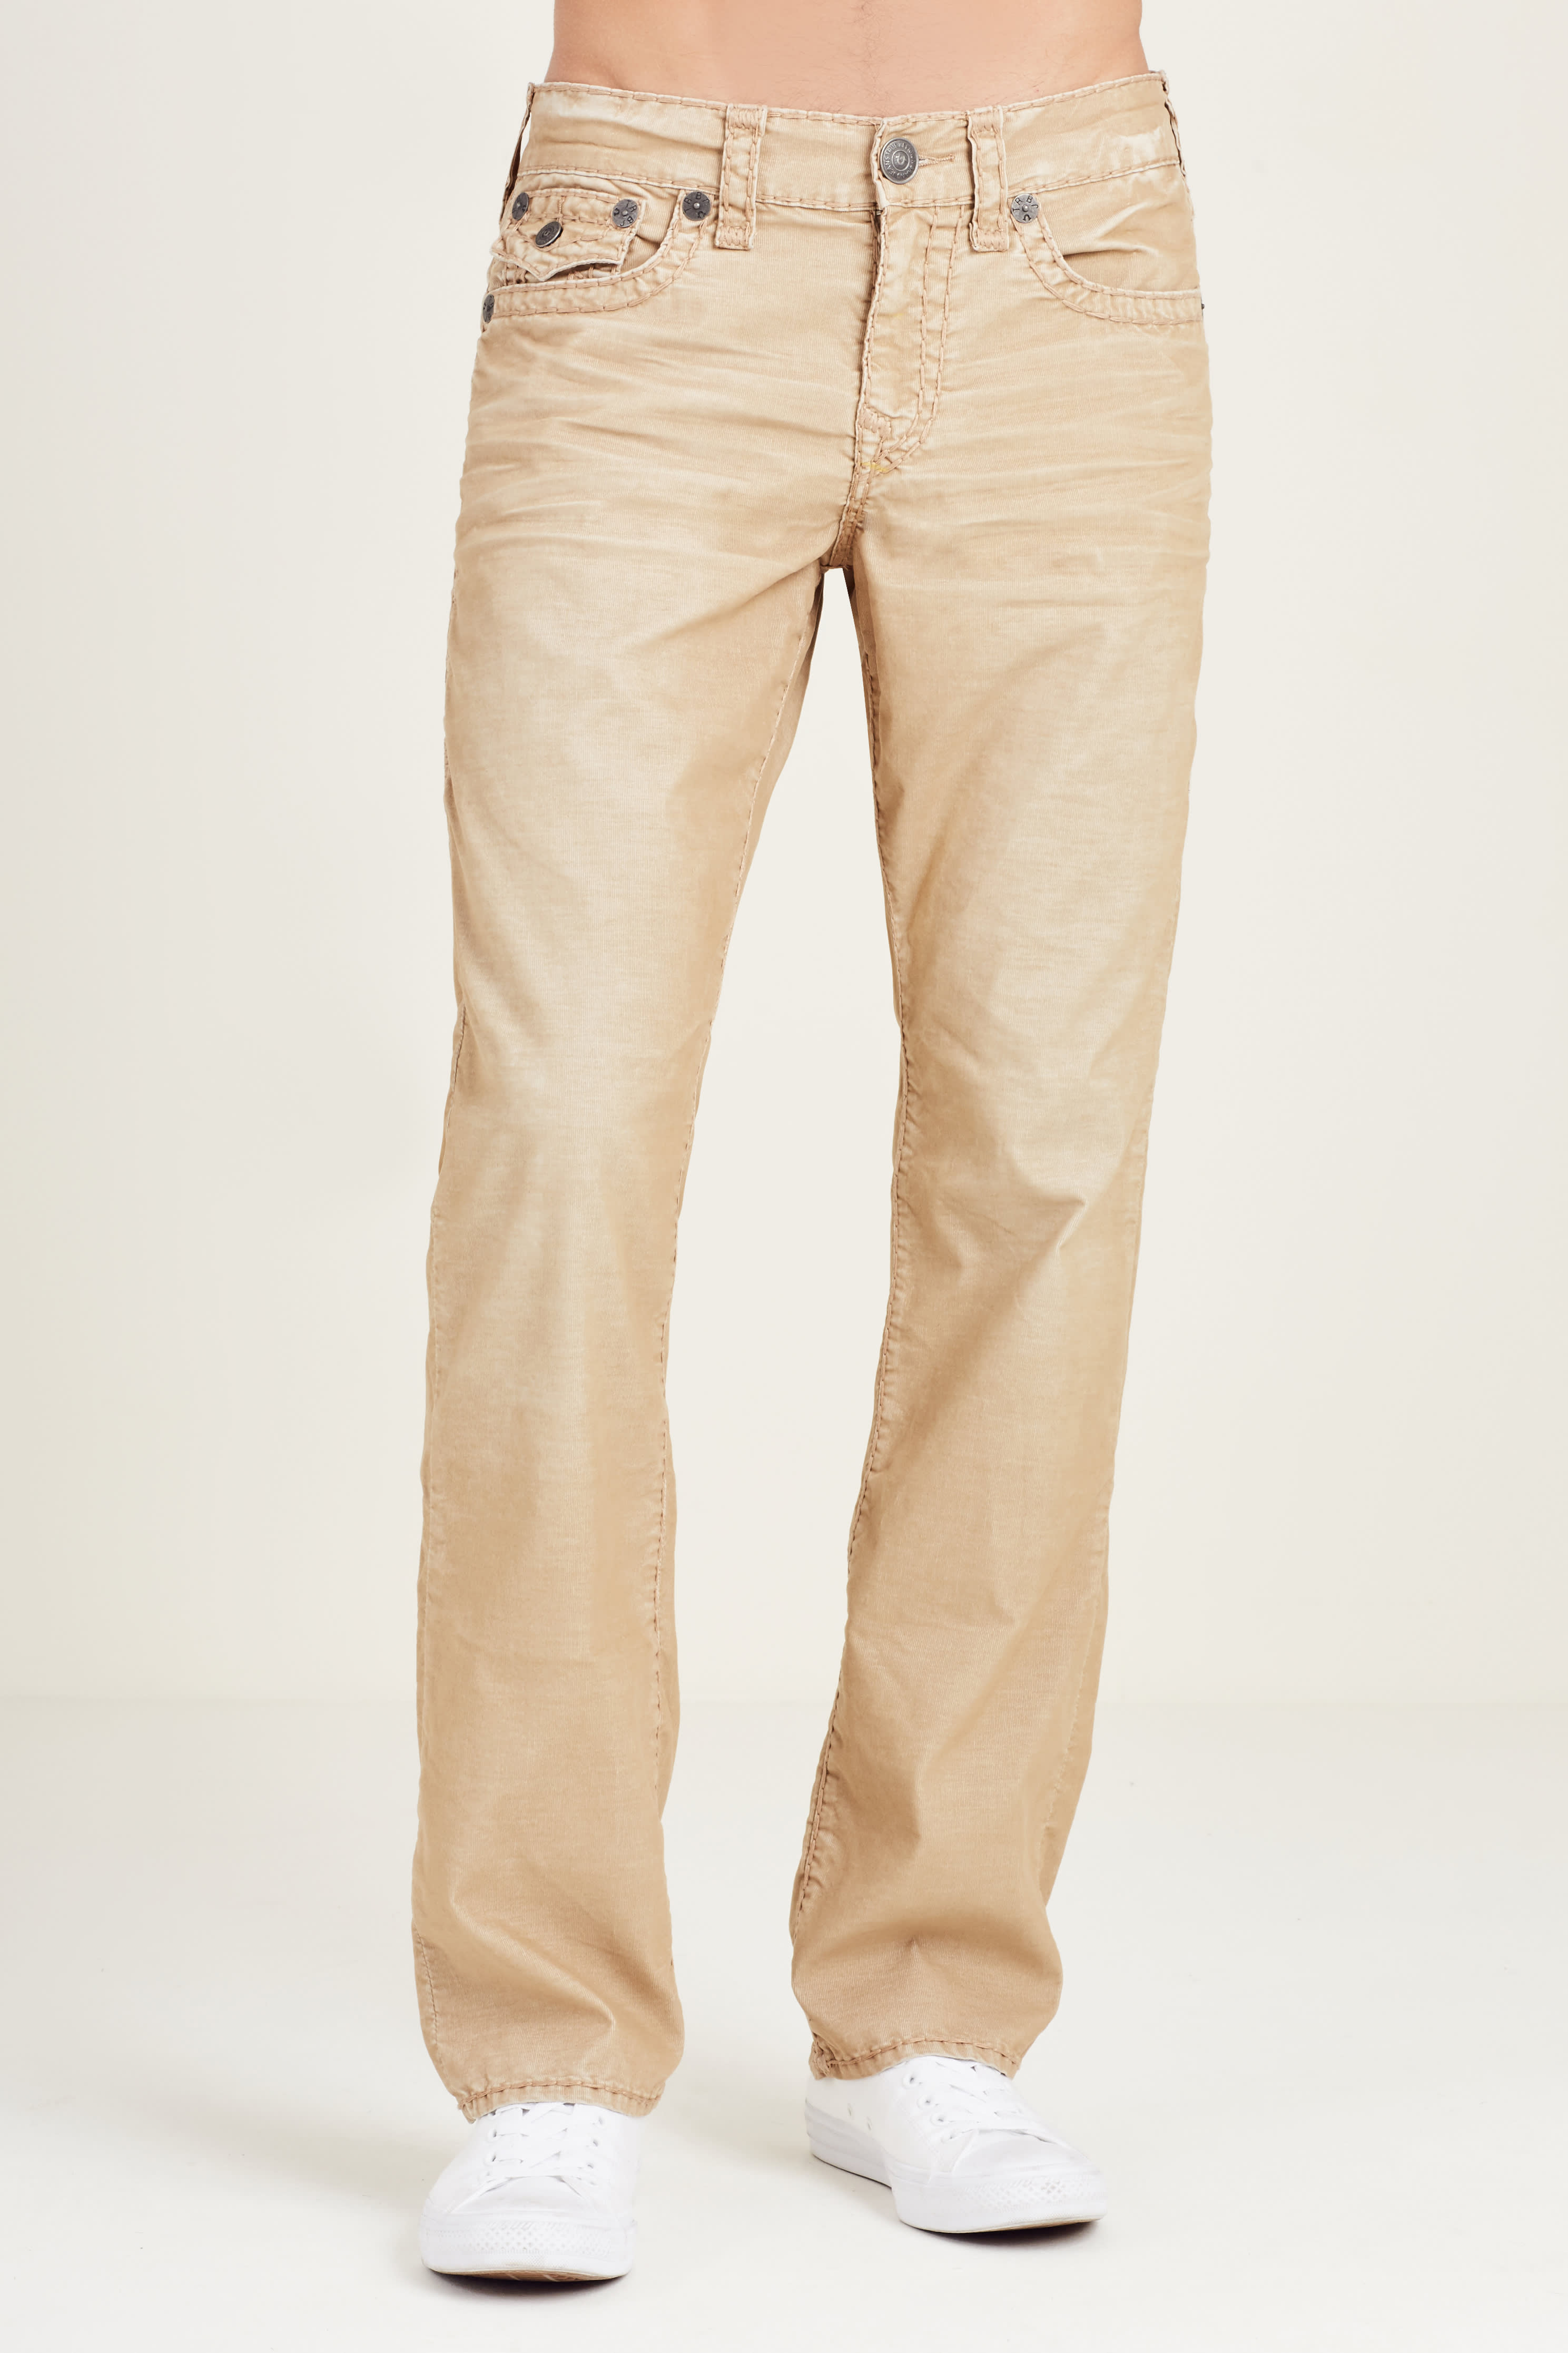 HAND PICKED STRAIGHT CORDUROY SUPER T MENS PANT